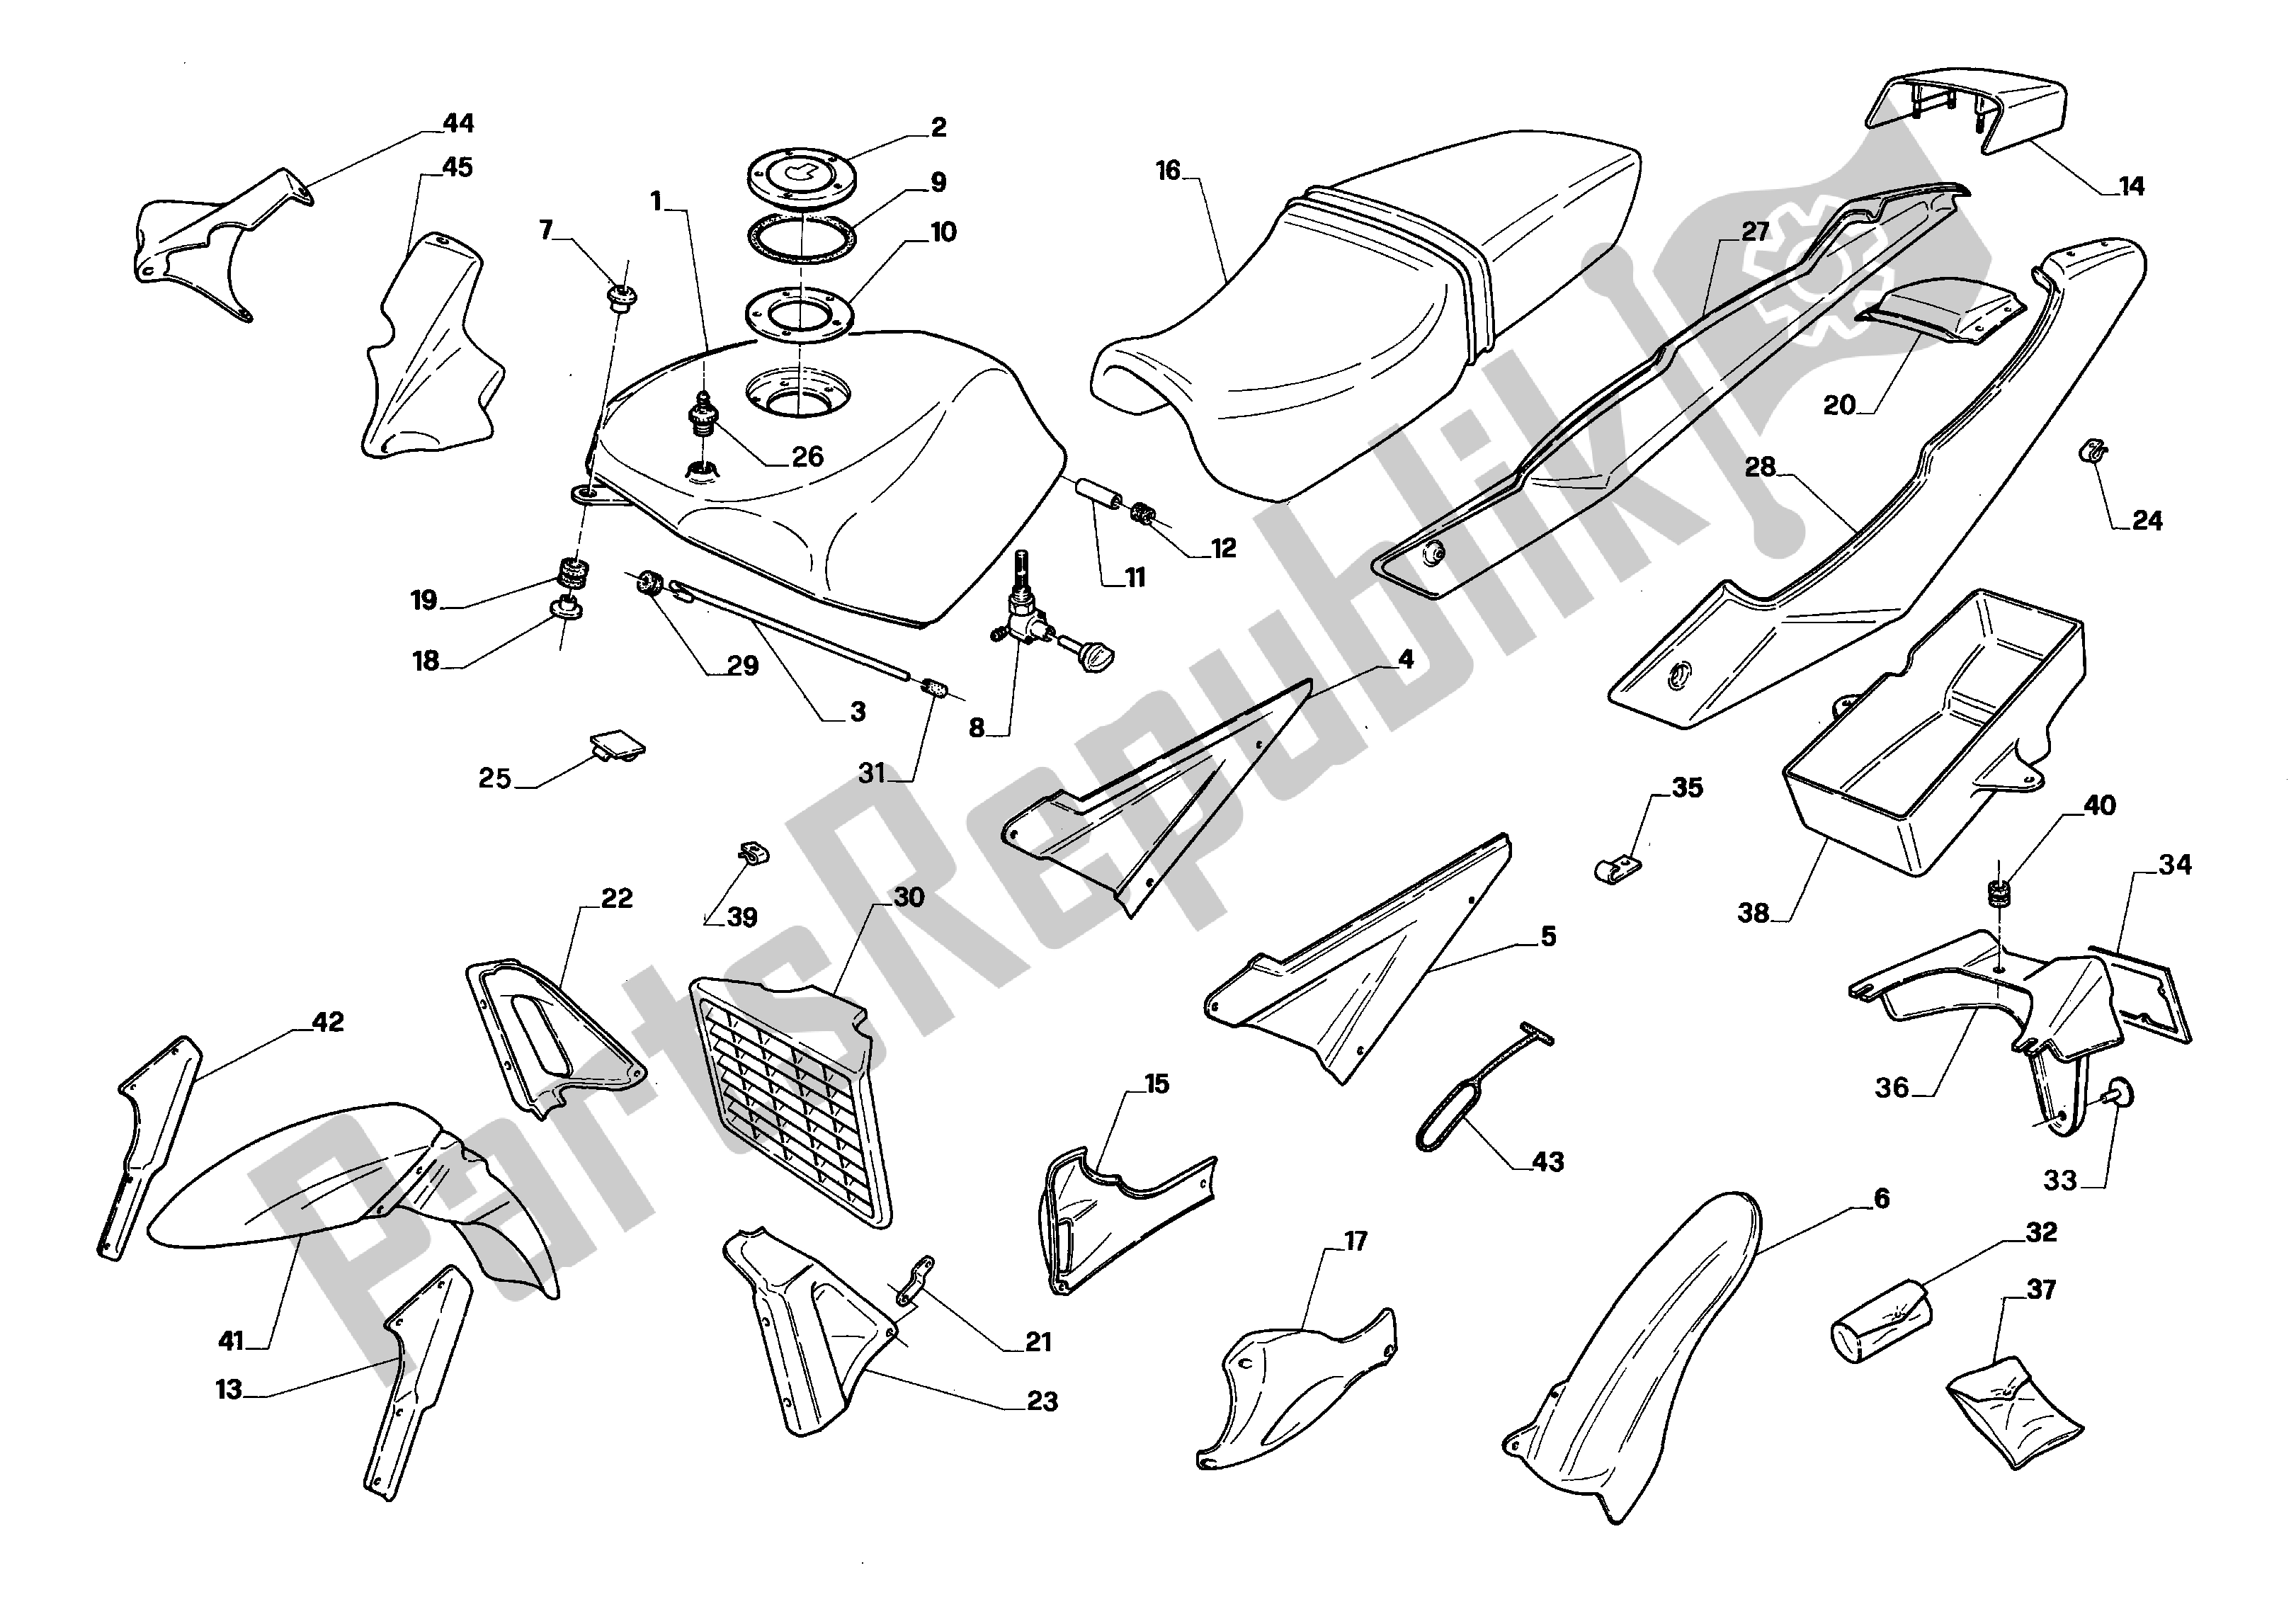 All parts for the Body of the Aprilia AF1 125 1990 - 1991